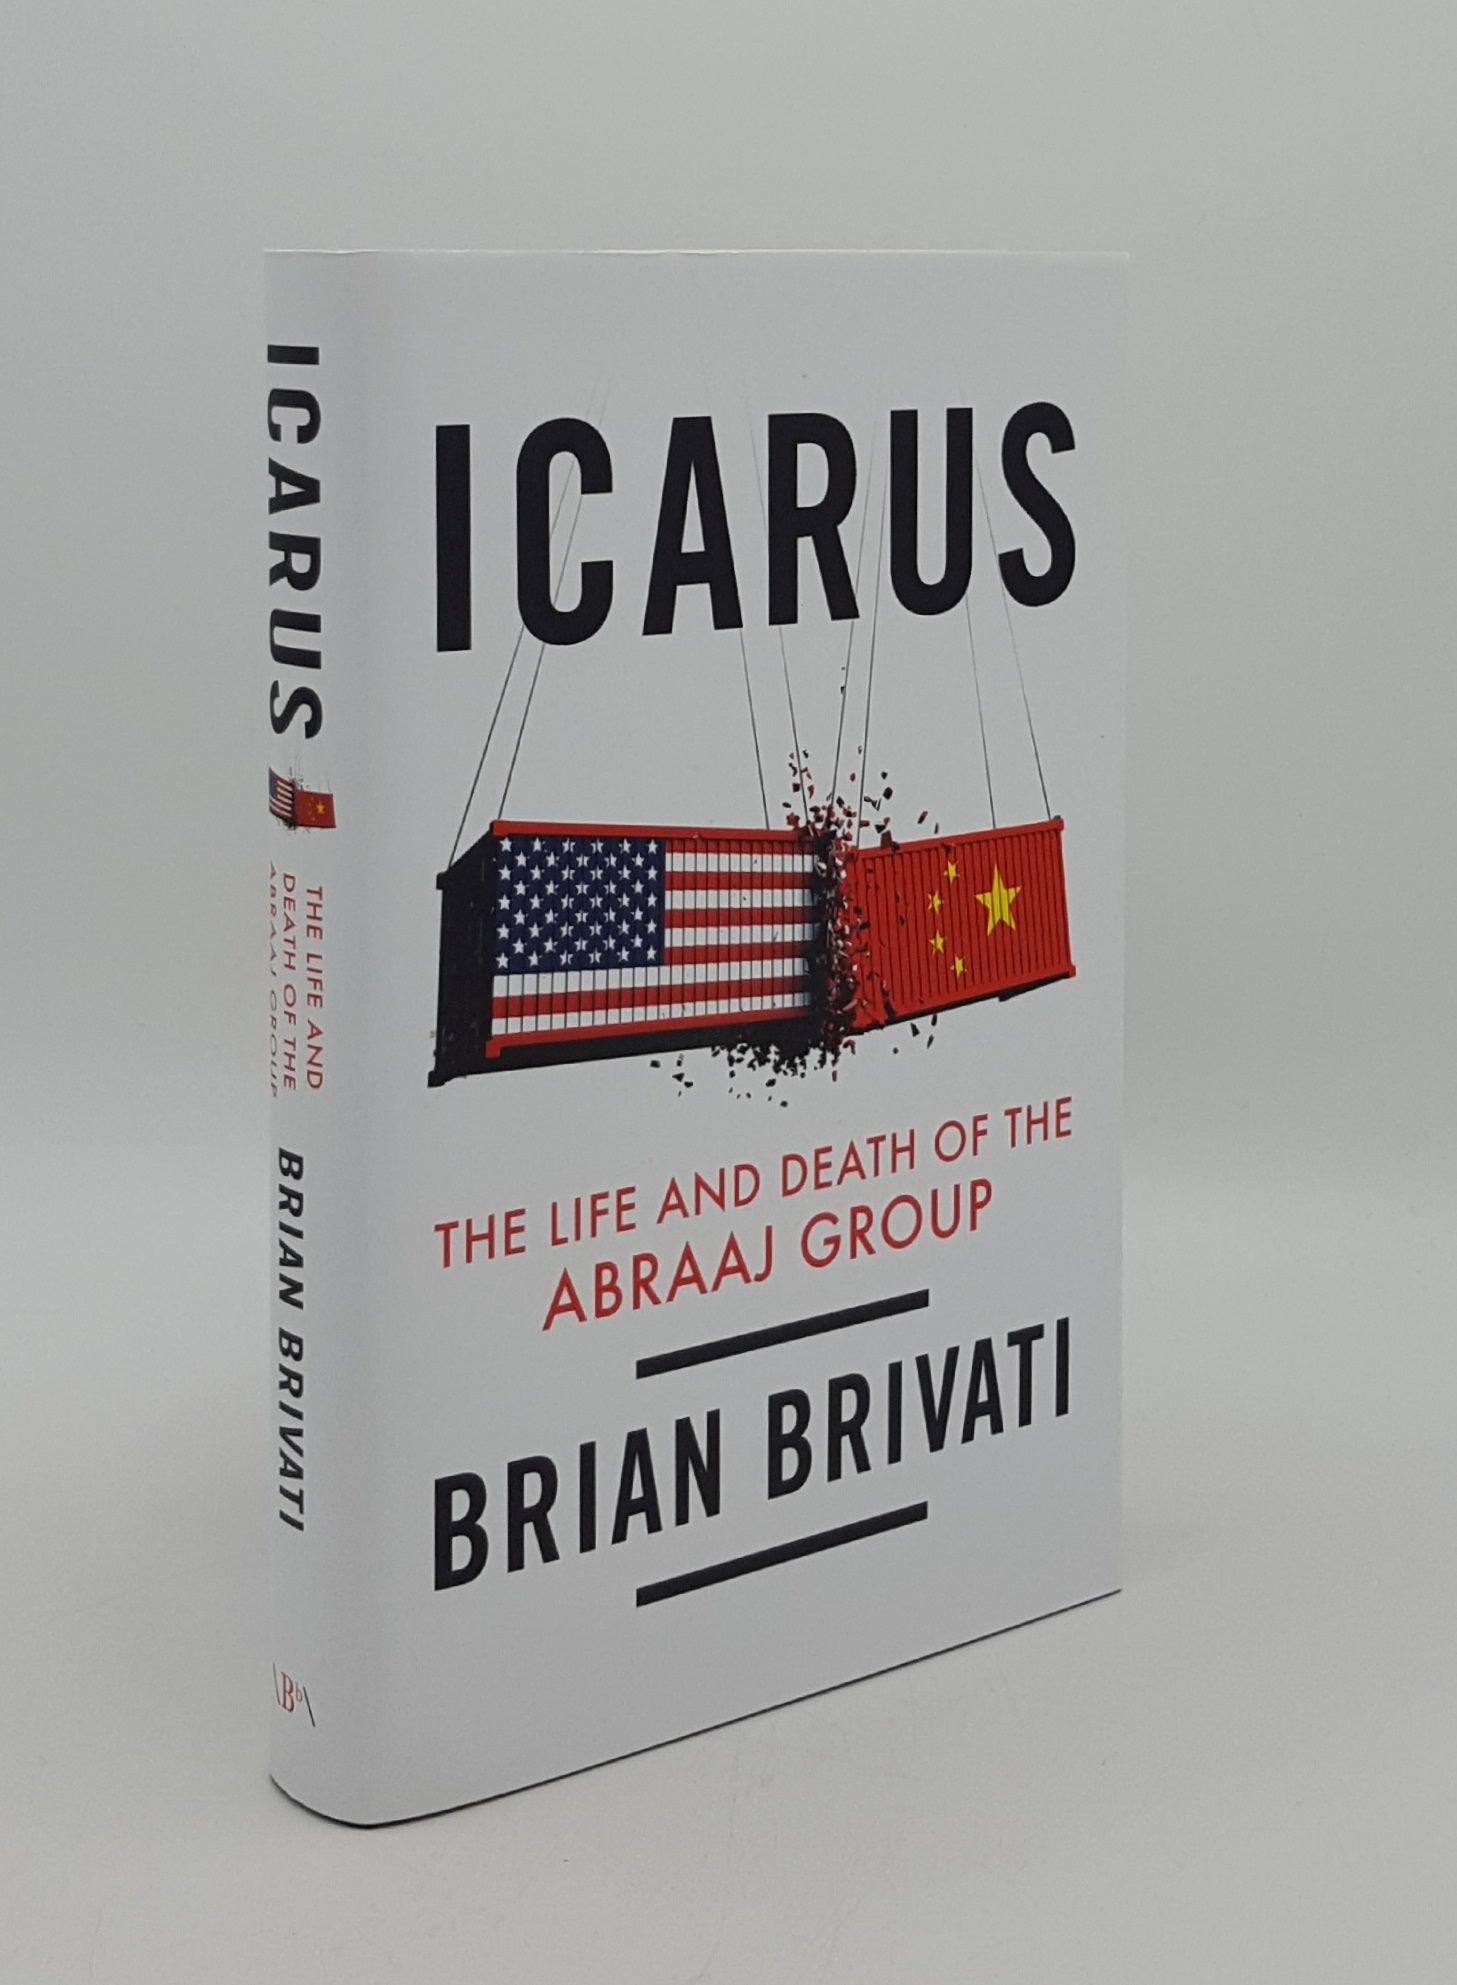 BRIVATI Brian - Icarus the Life and Death of the Abraaj Group